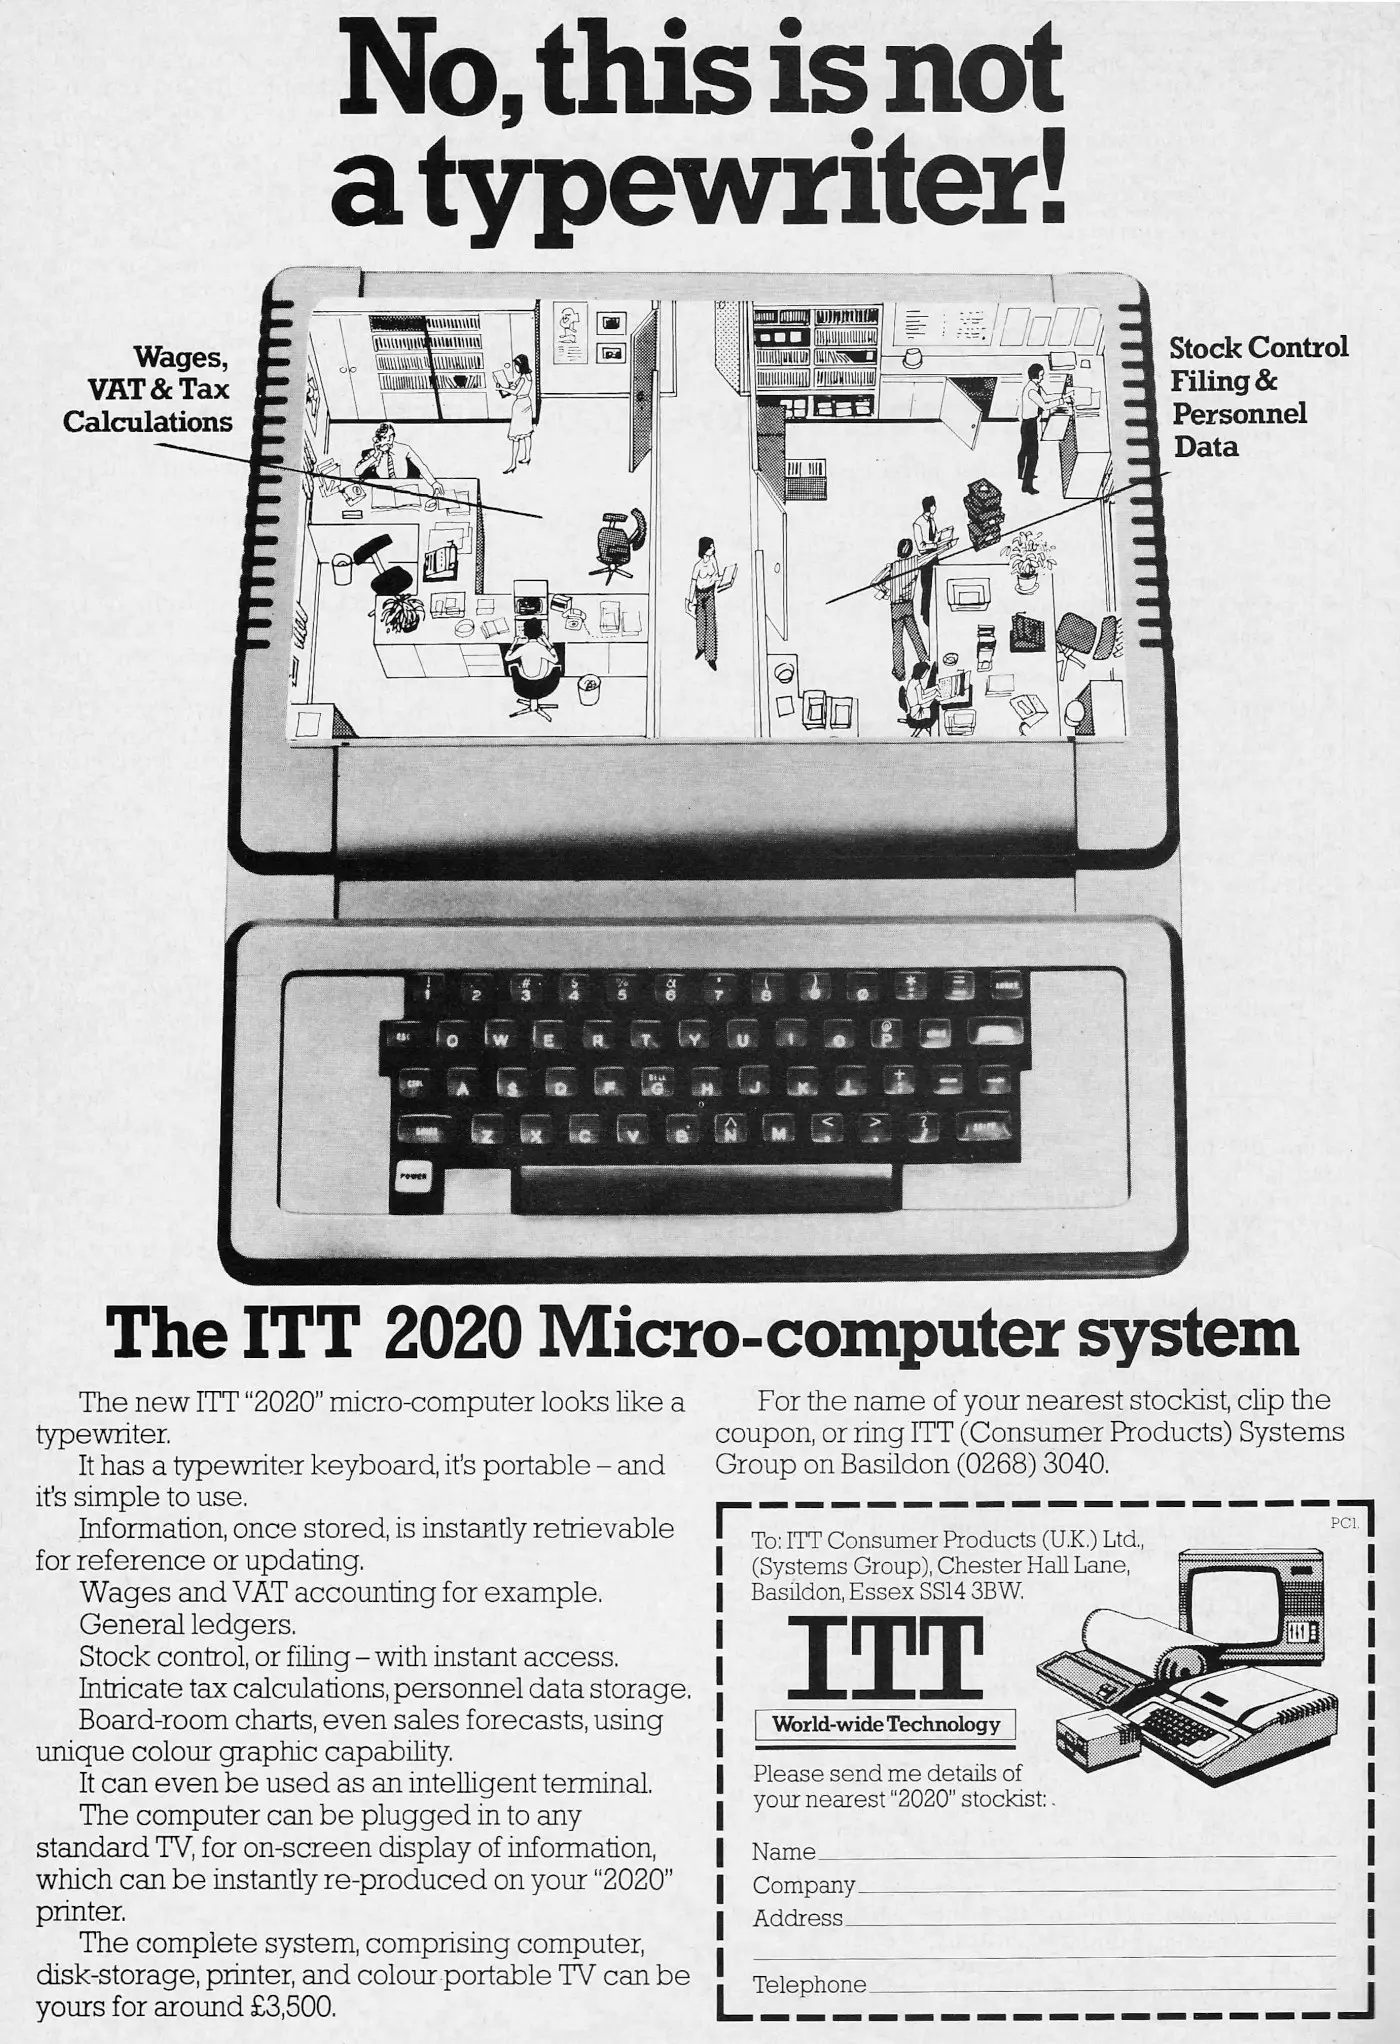 ITT Advert: The ITT 2020 Micro-computer system: No, this is not a typewriter!, from Personal Computer World, January 1980